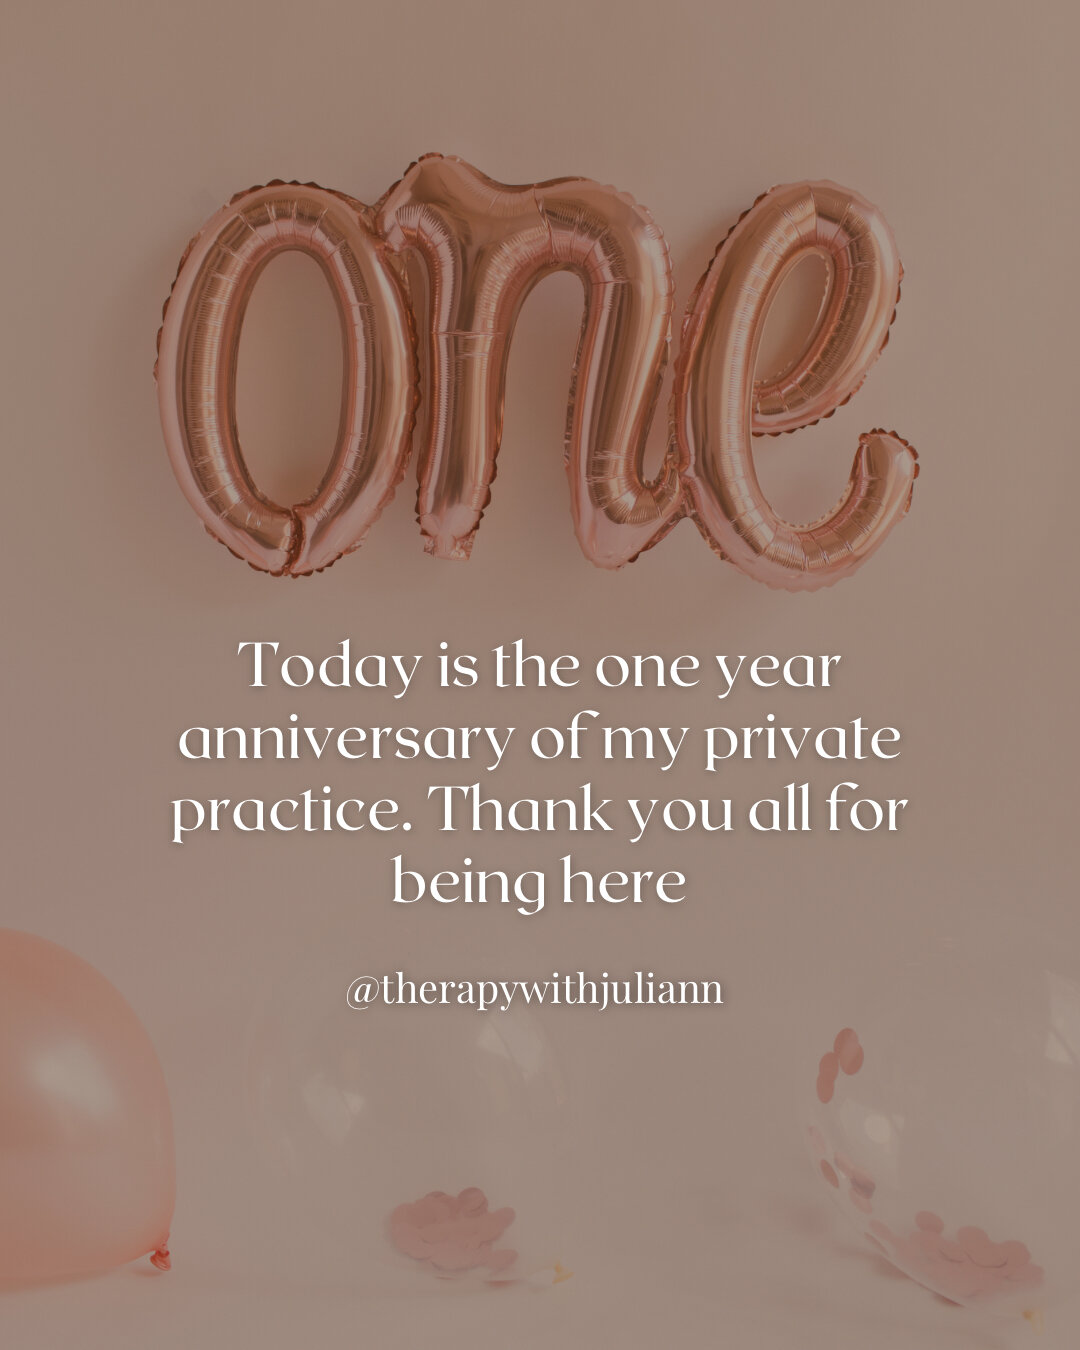 Happy happy birthday to my baby, my private practice. It's been a whole year since I officially became self employed + started my own practice. ​​​​​​​​
365 days later + I still live indoors 😅 ​​​​​​​​
The journey to starting my own practice was not